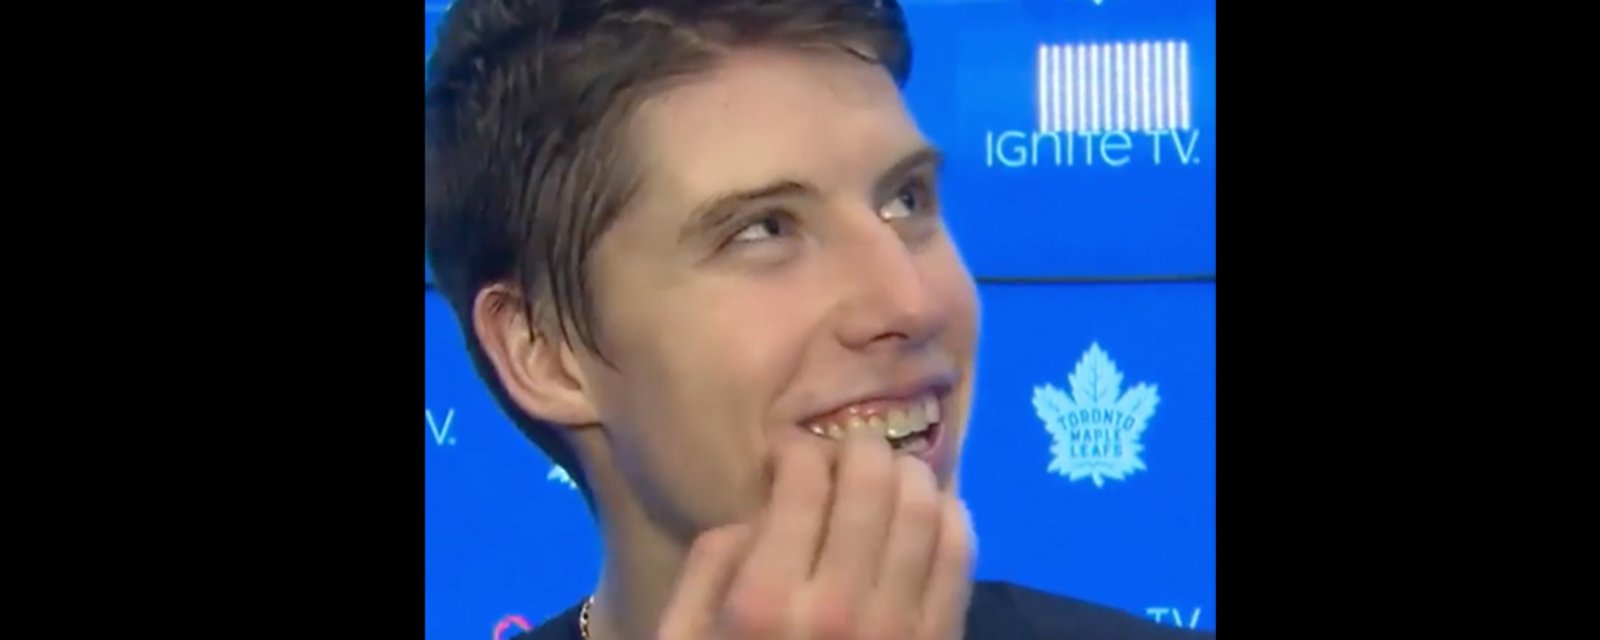 Watch Mitch Marner’s priceless reaction to a reporter using a selfie stick